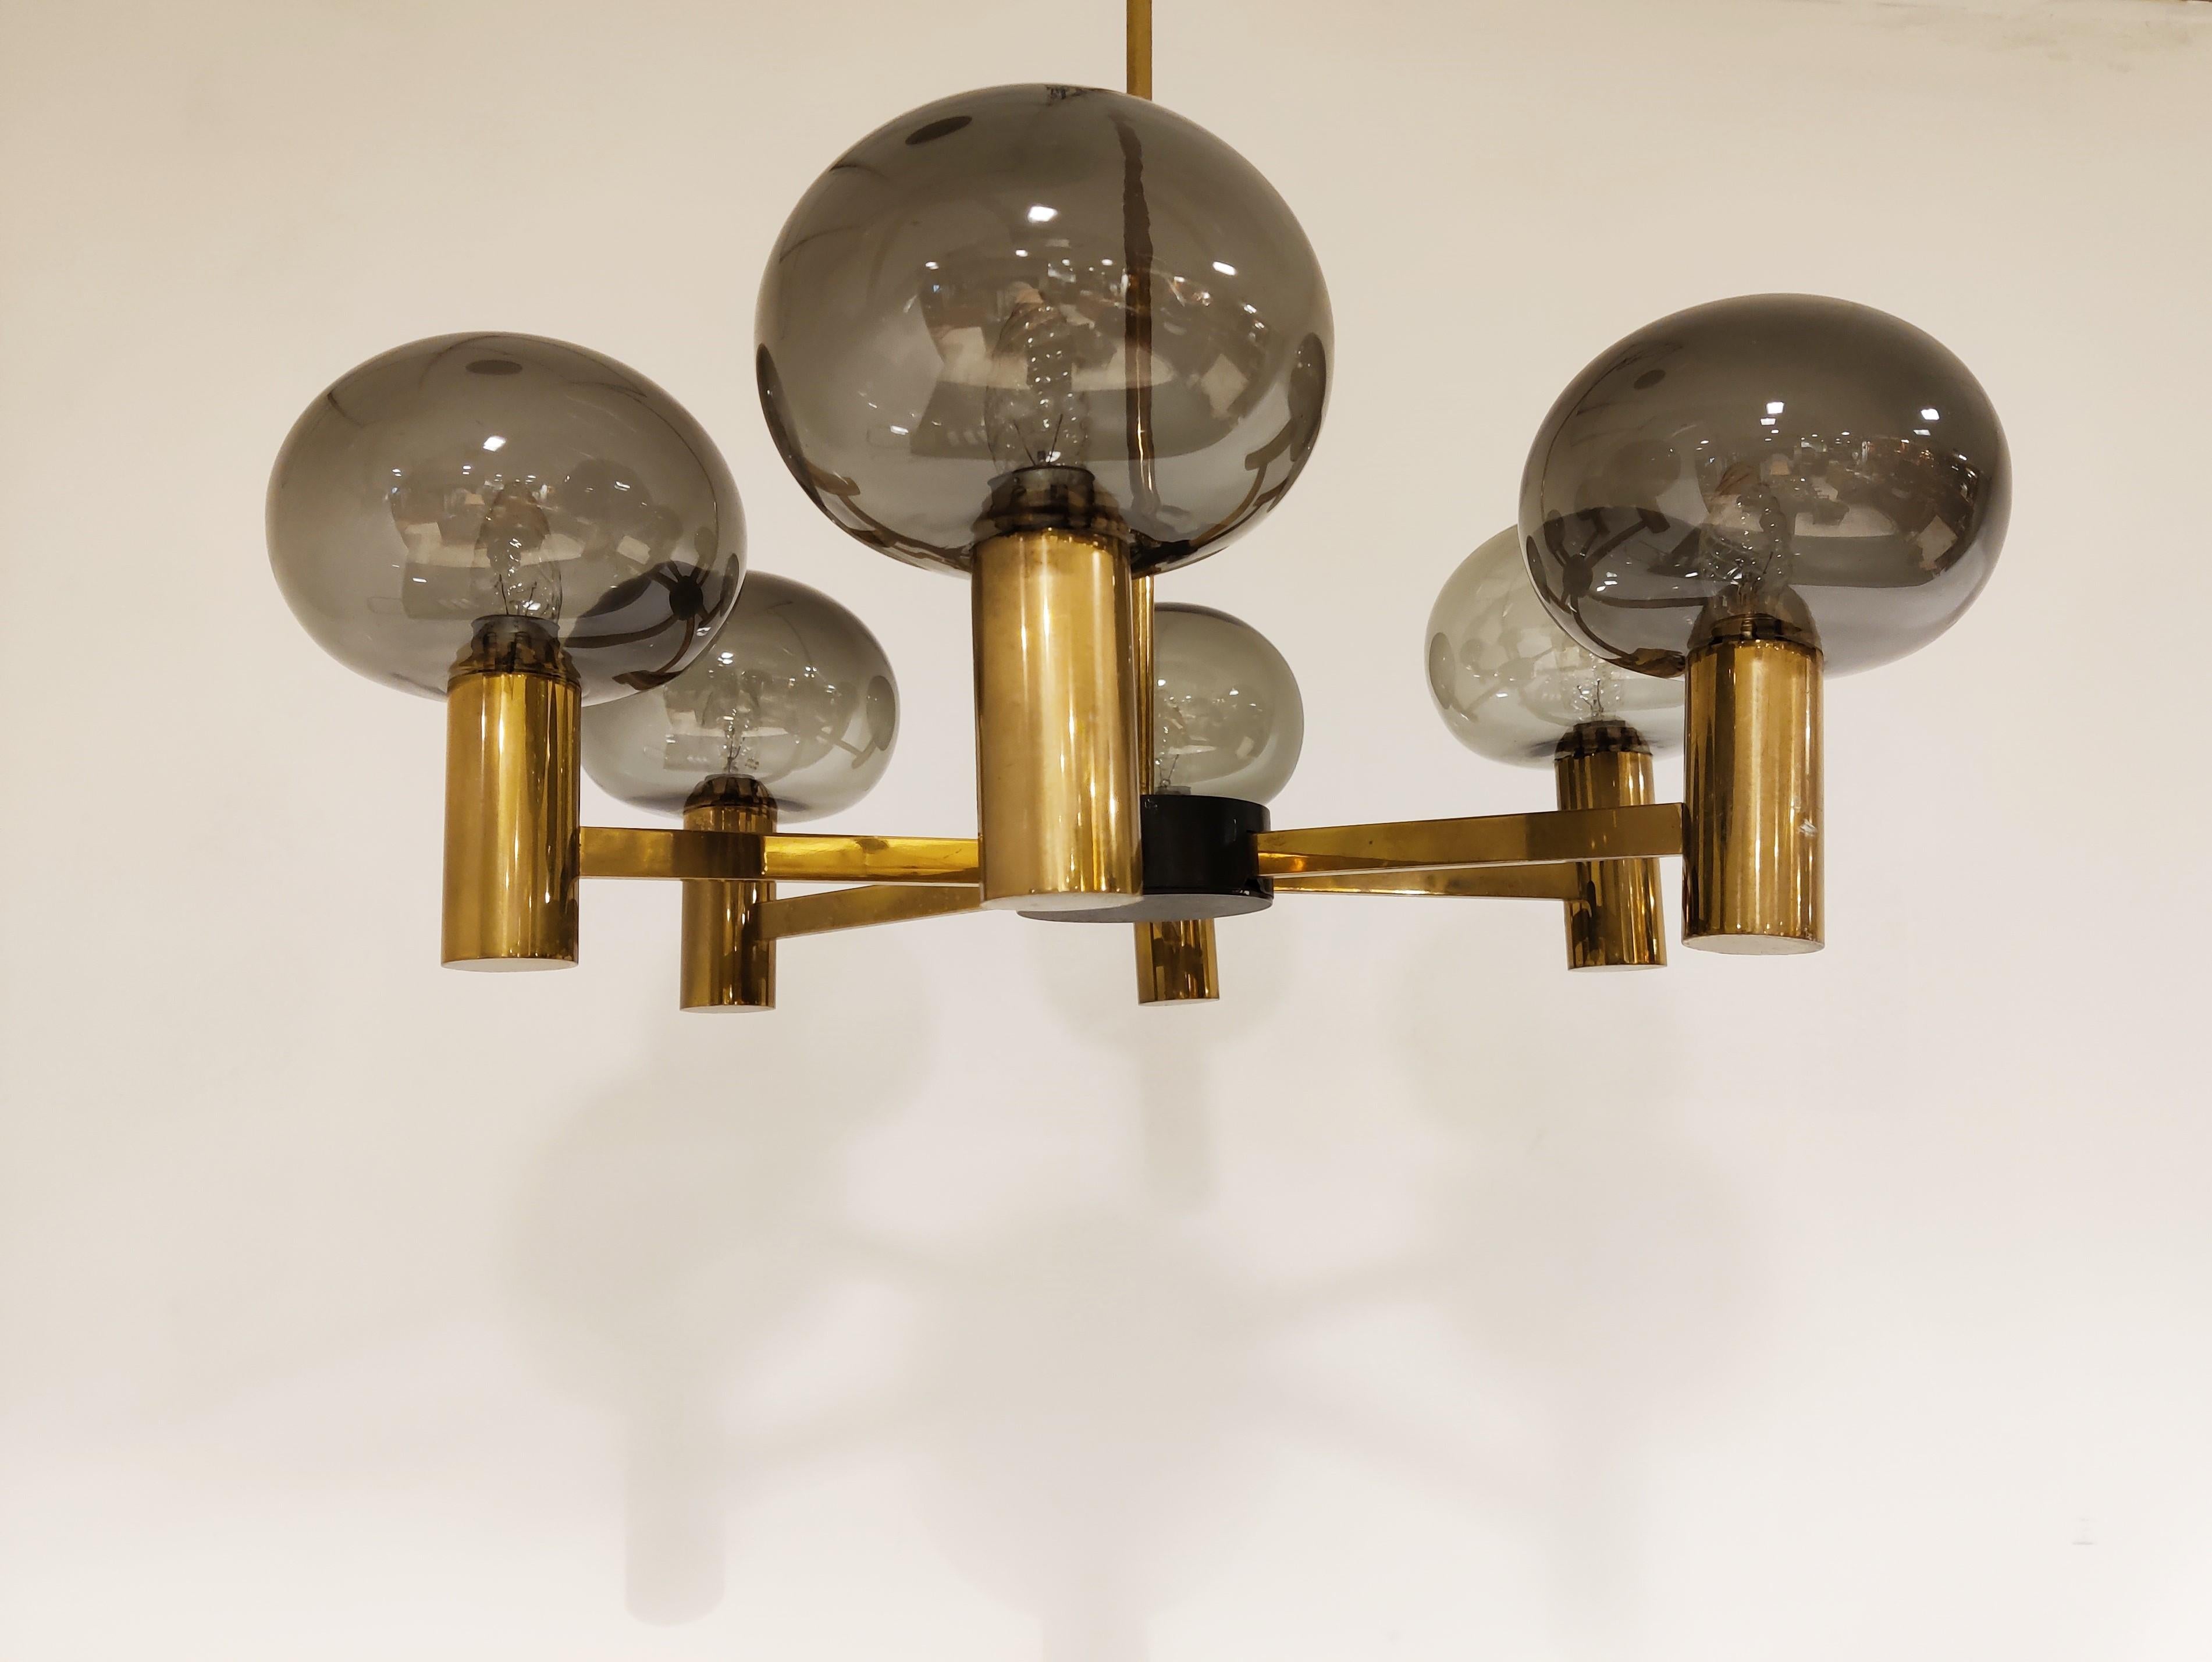 Beautiful mid century brass Swedish chandelier with smoked glass lamp shades.

The designed/manufacturer is unknown but it has a timeless design and emits a beautiful light.

Good original condition.

Tested and ready to use with regular E14